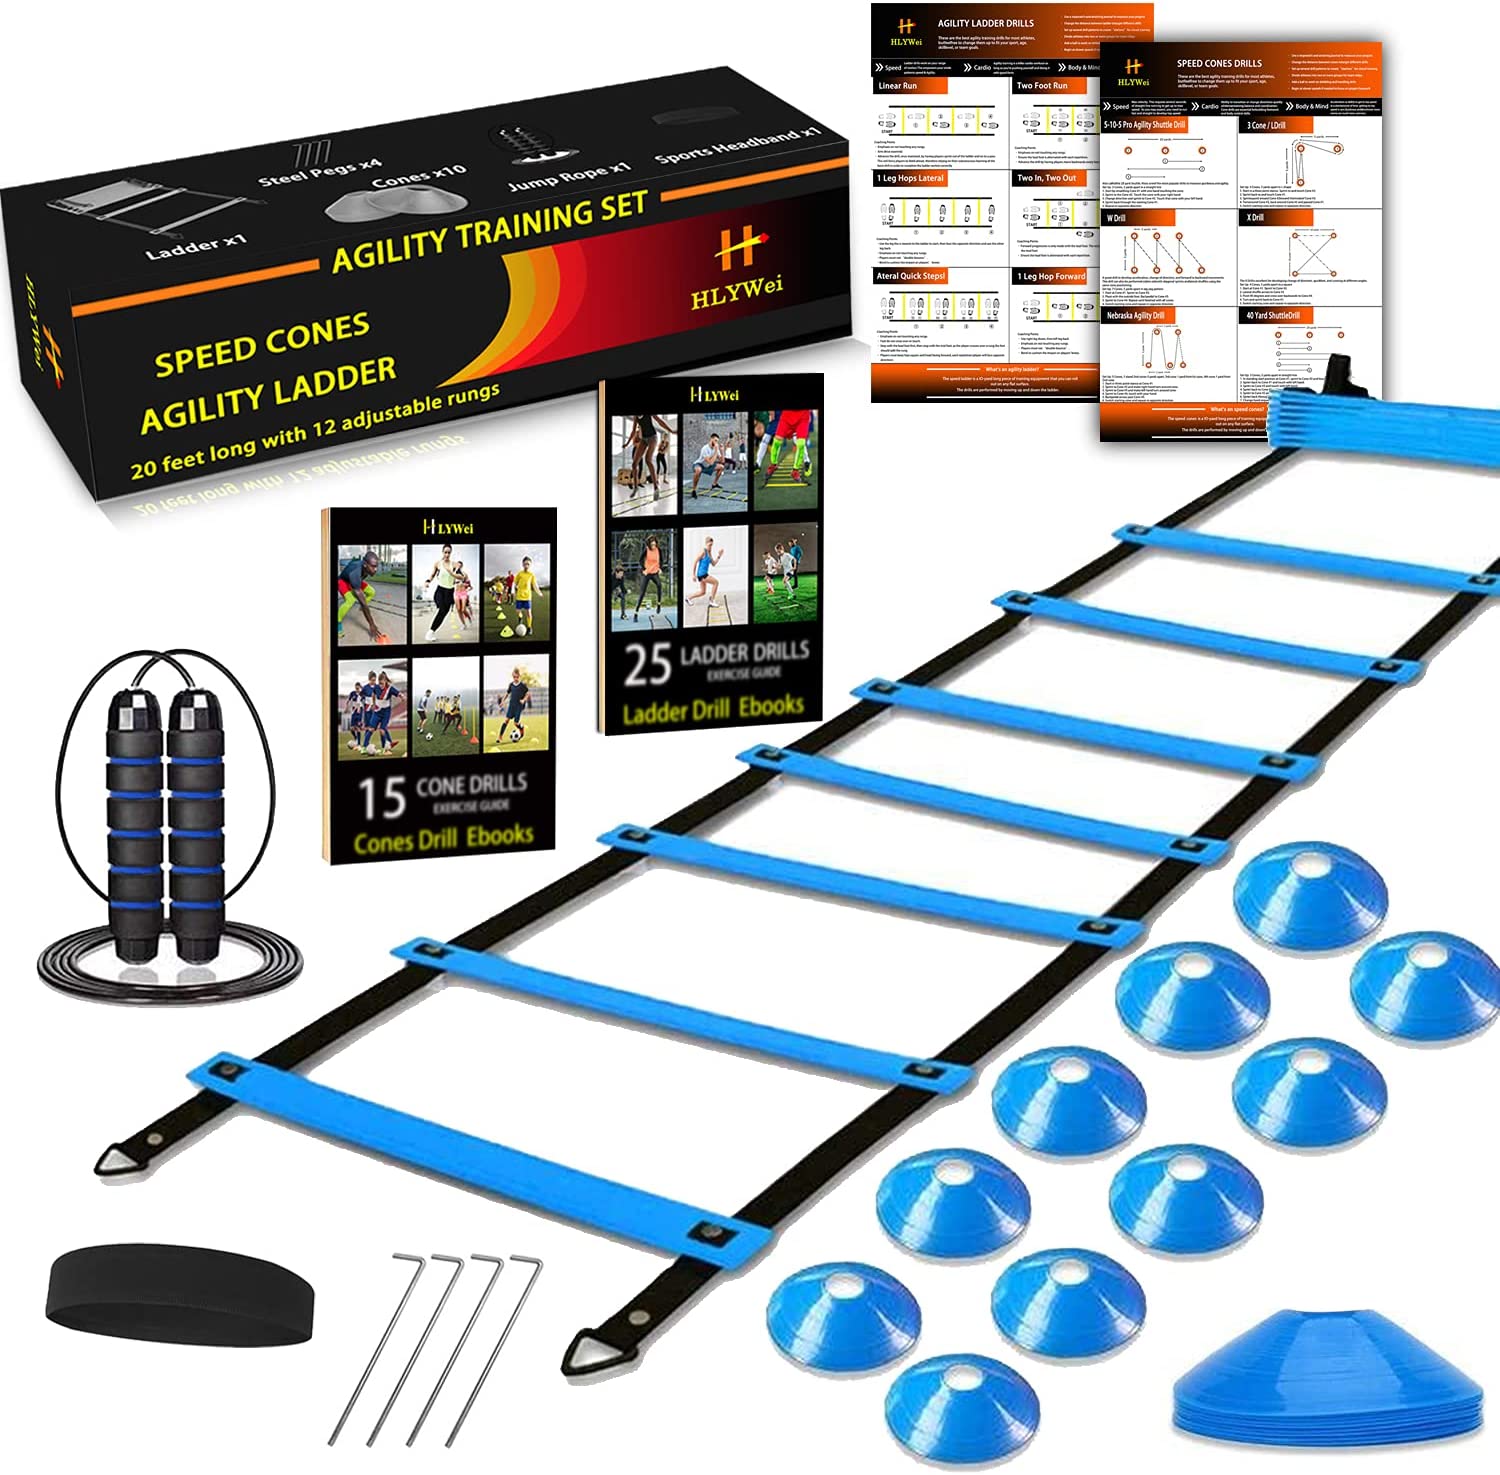 HLYWEI Speed Agility Training Set, Includes 1 Agility Ladder, 4 Steel Stakes, 1 Sports Headband,1 Jump Rope, 10 Disc Cones and Gym Carry Bag - Speed Training Equipment for Soccer Football Basketball